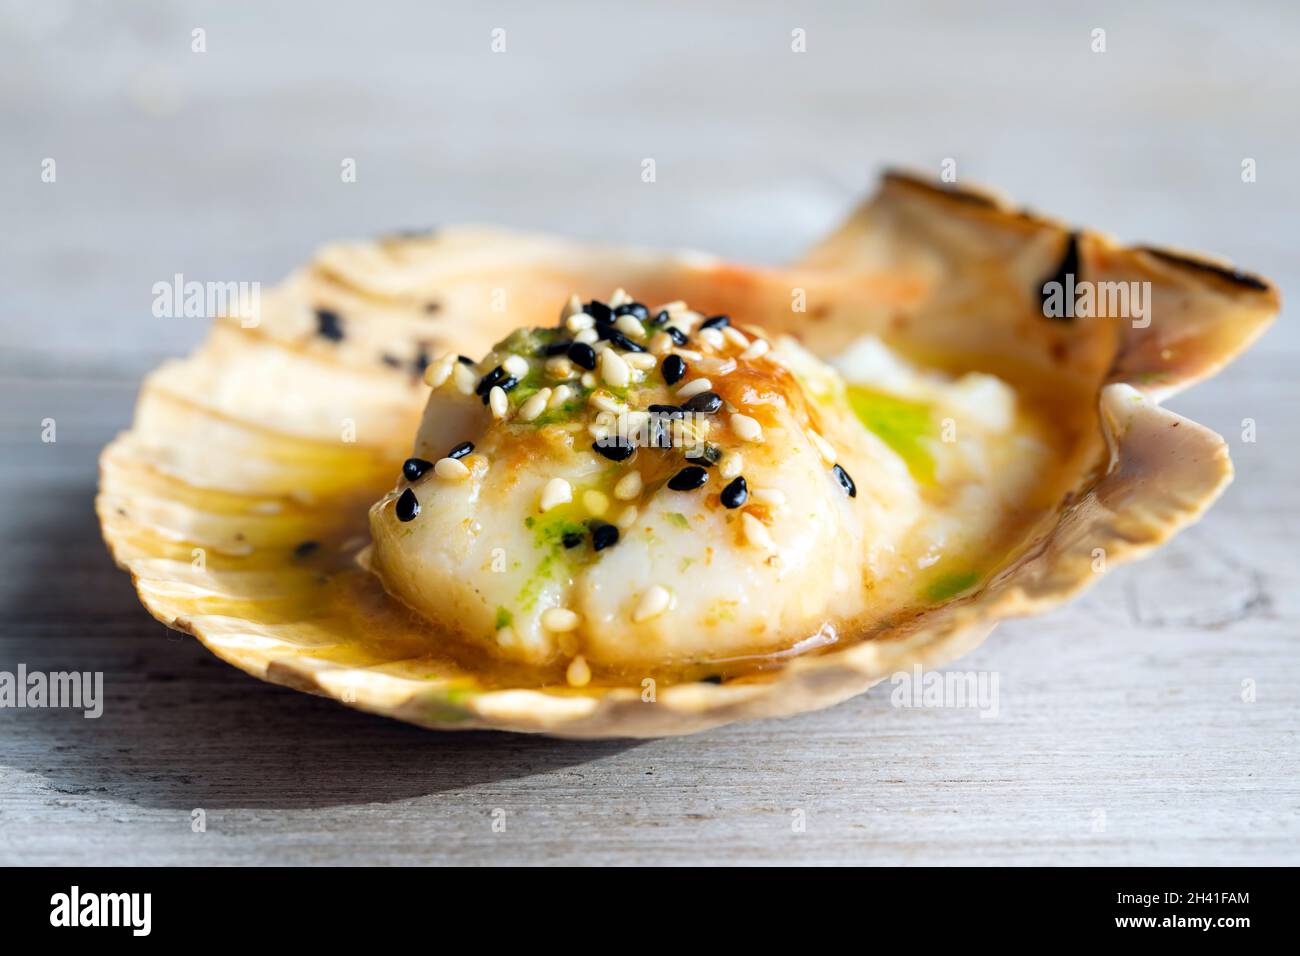 Grilled scallop with miso butter, sesame seeds and parsley oil Stock Photo